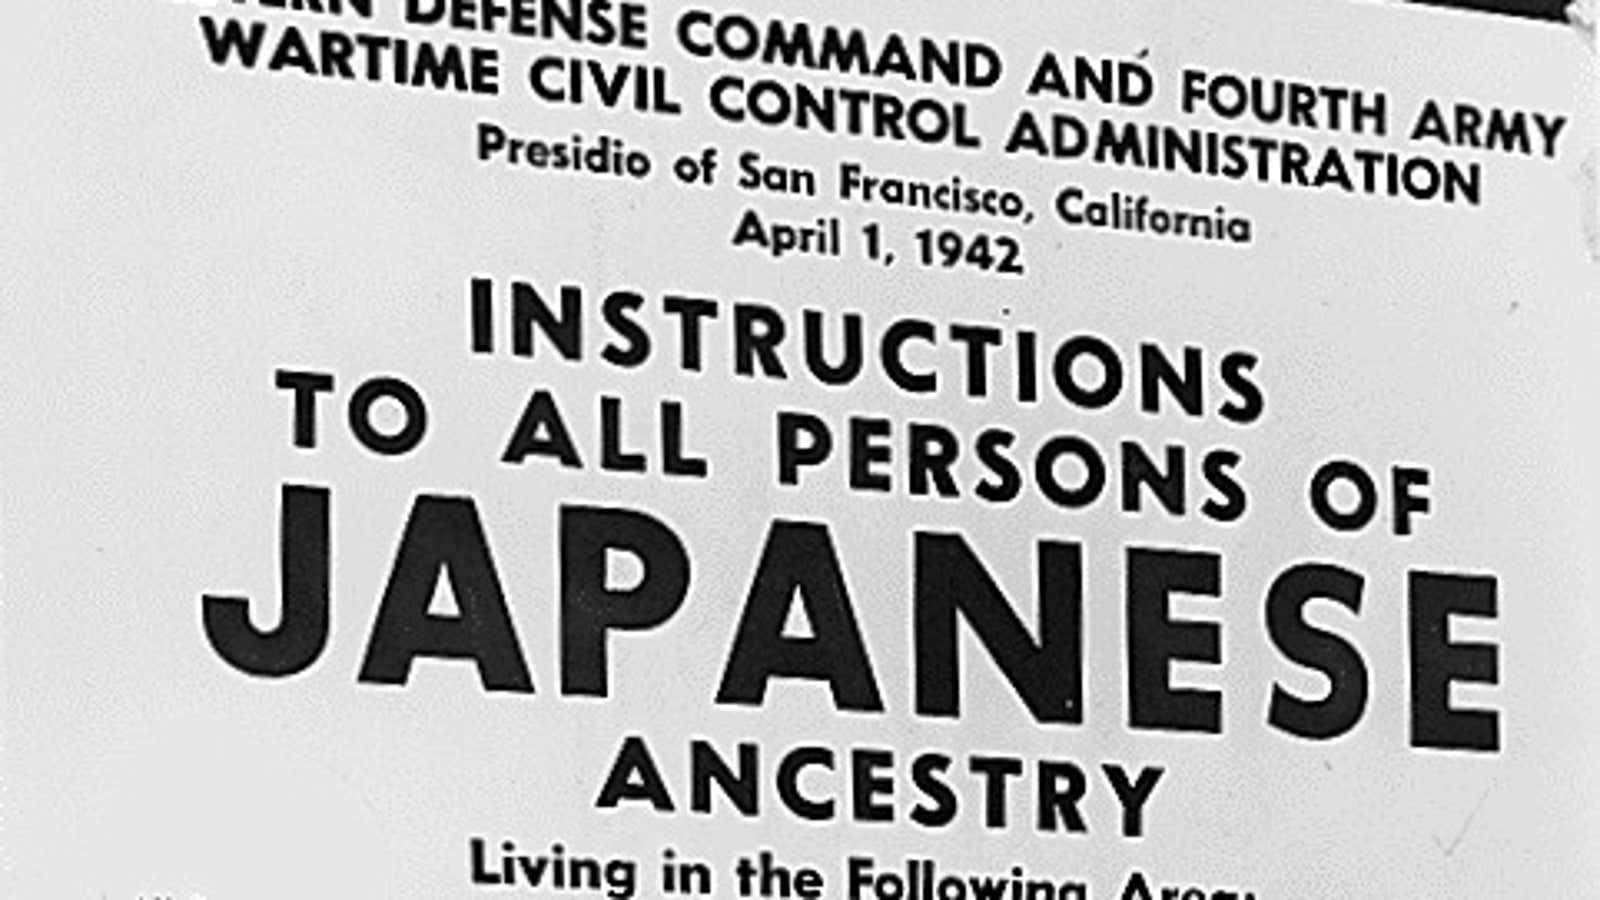 Instructions posted in 1942  in San Francisco.